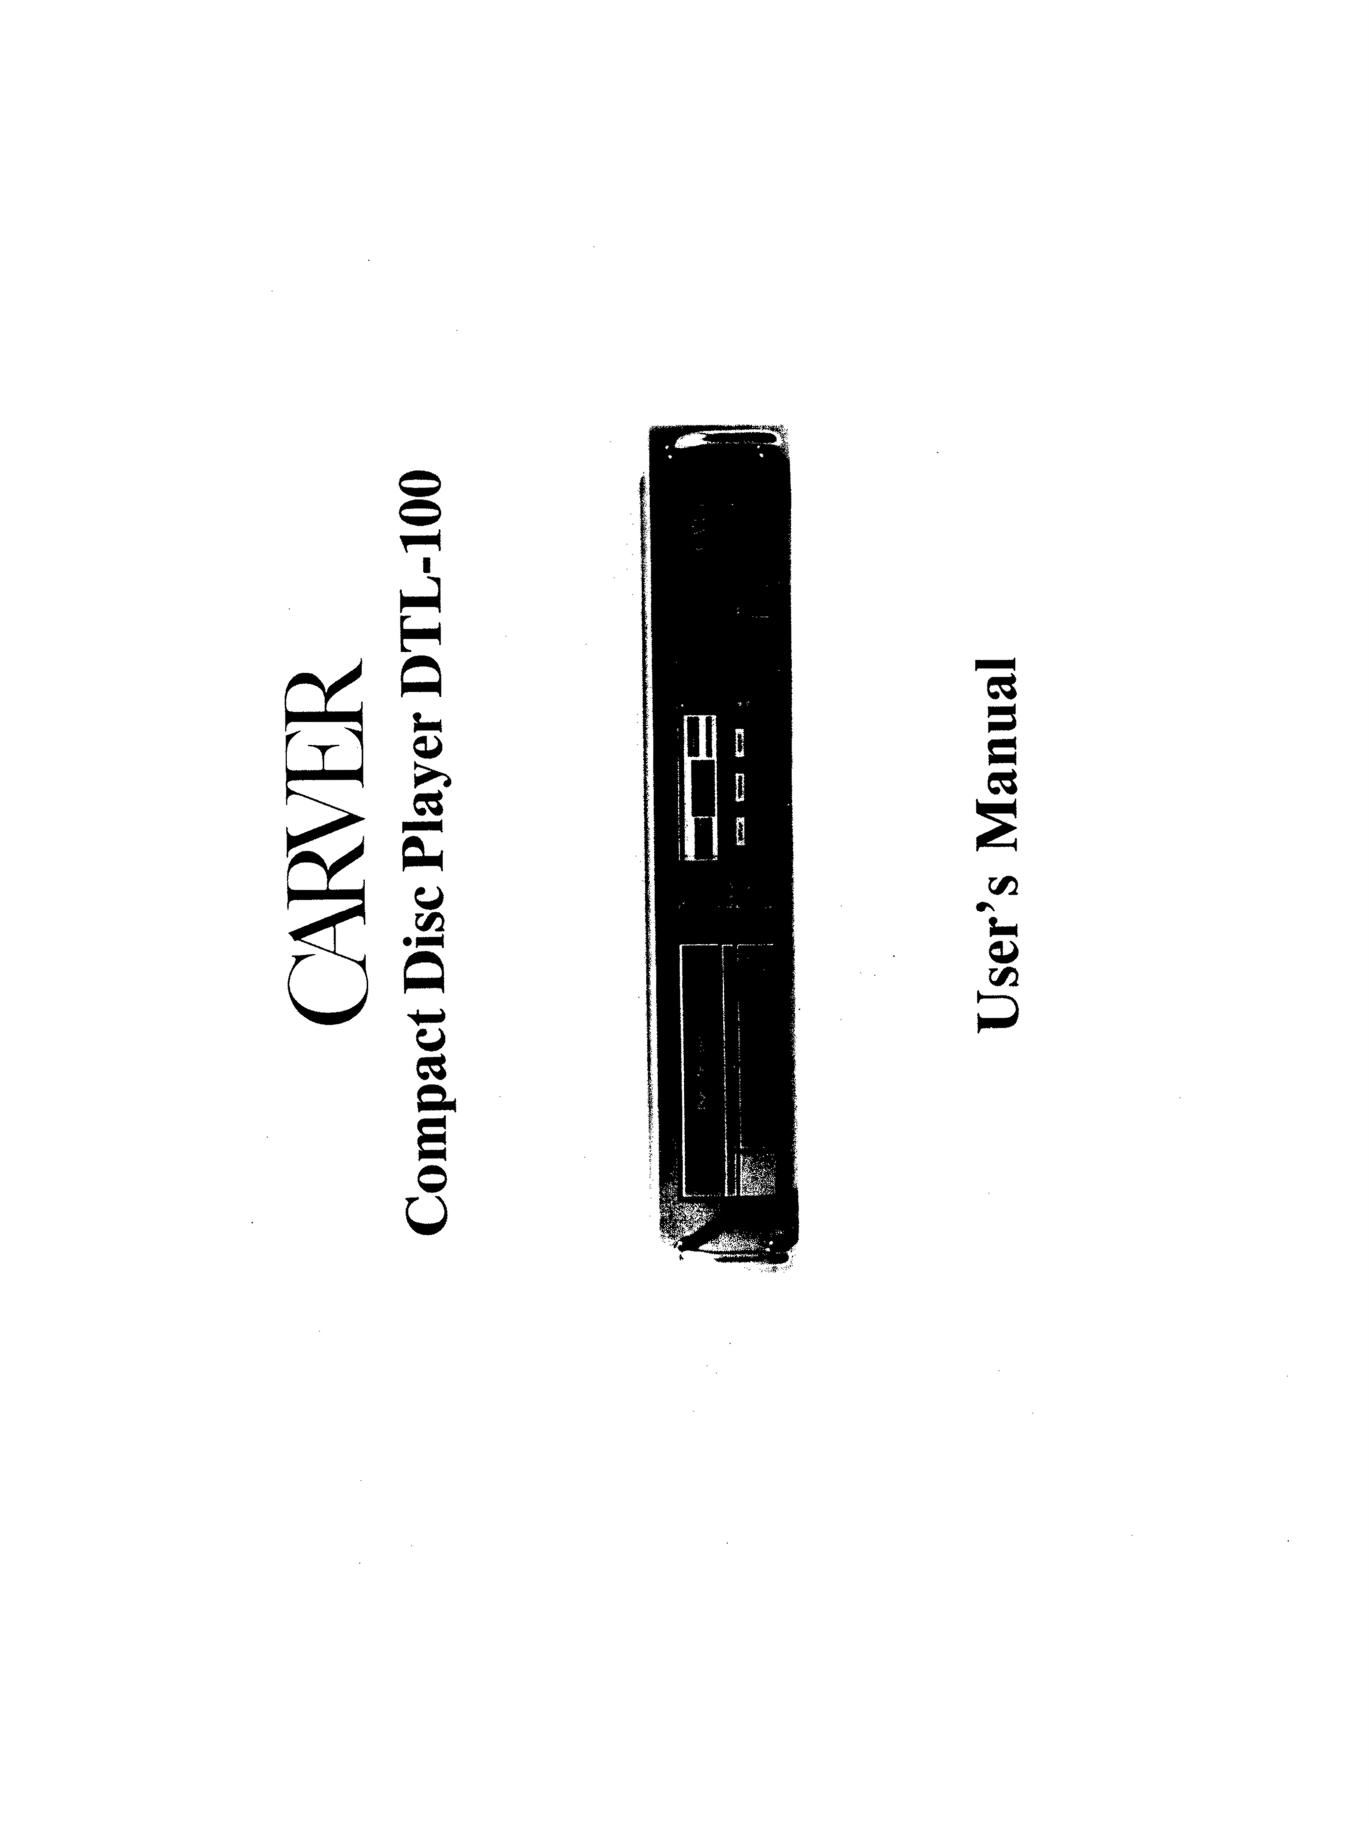 Carver DTL 100 Owners Manual